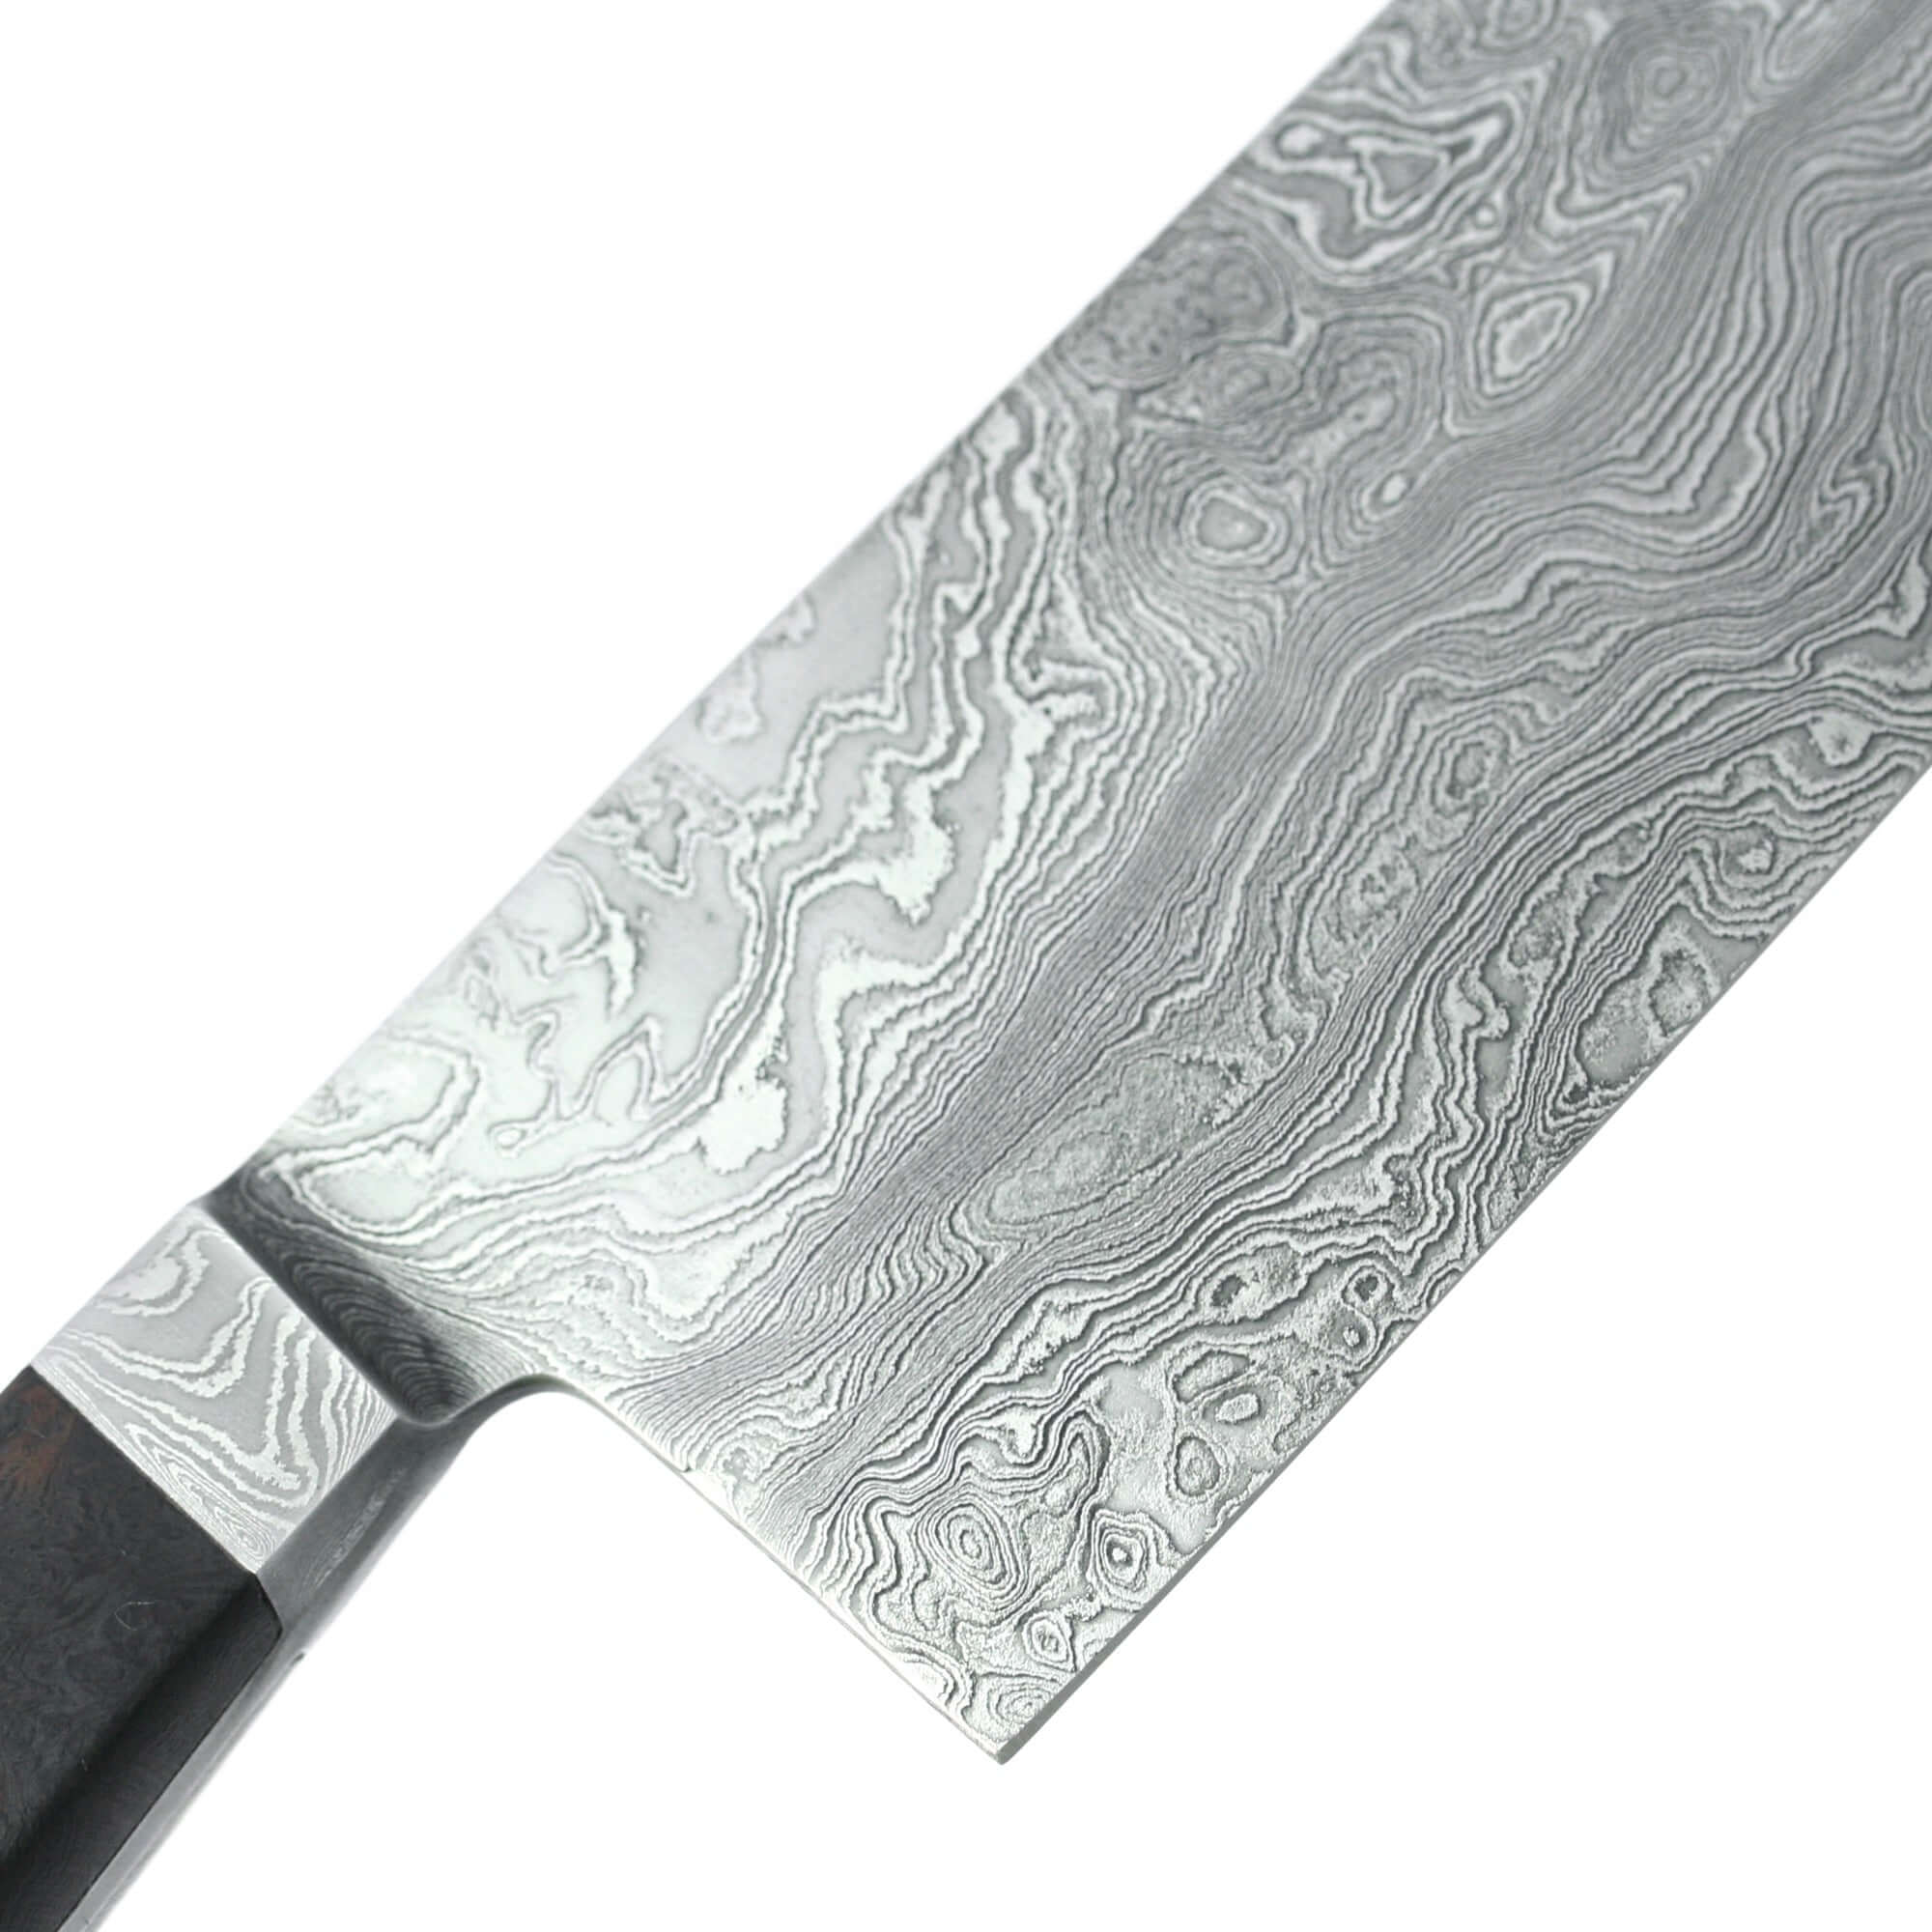 Chef Knife | Damascus Steel Chef Knife 8.26-inch Blade